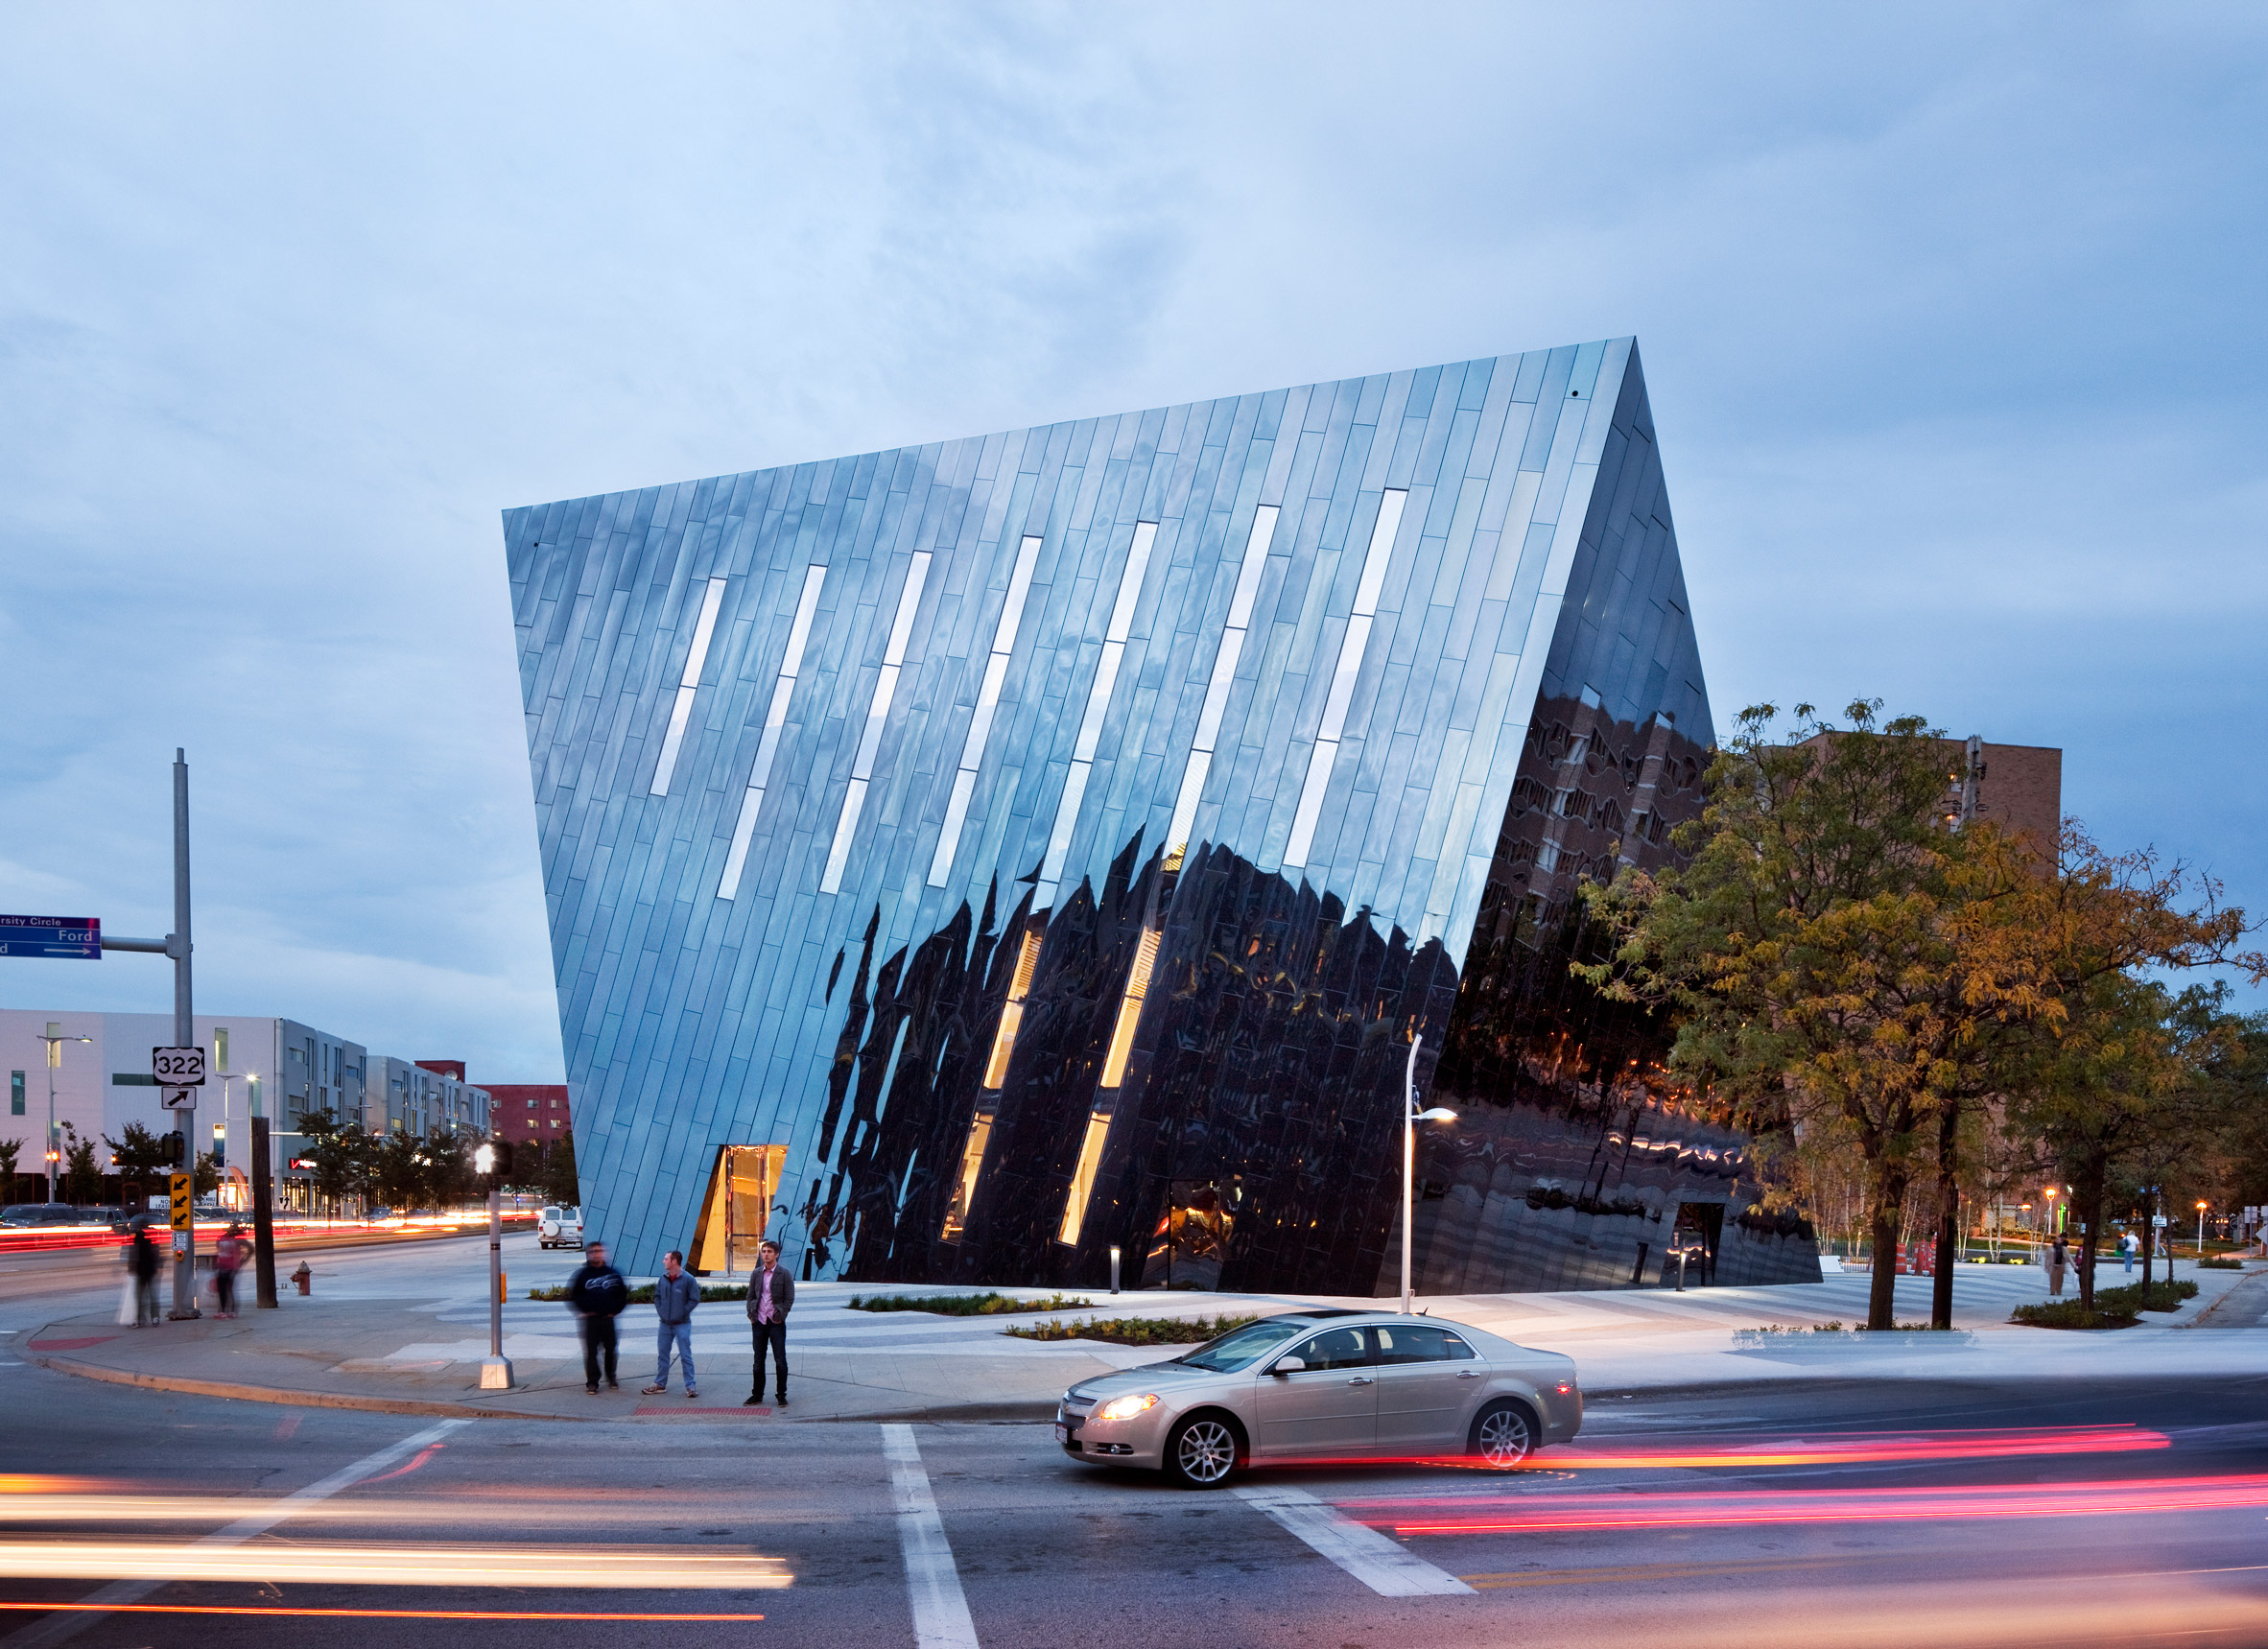 Museum of Contemporary Art Cleveland by Farshid Moussavi